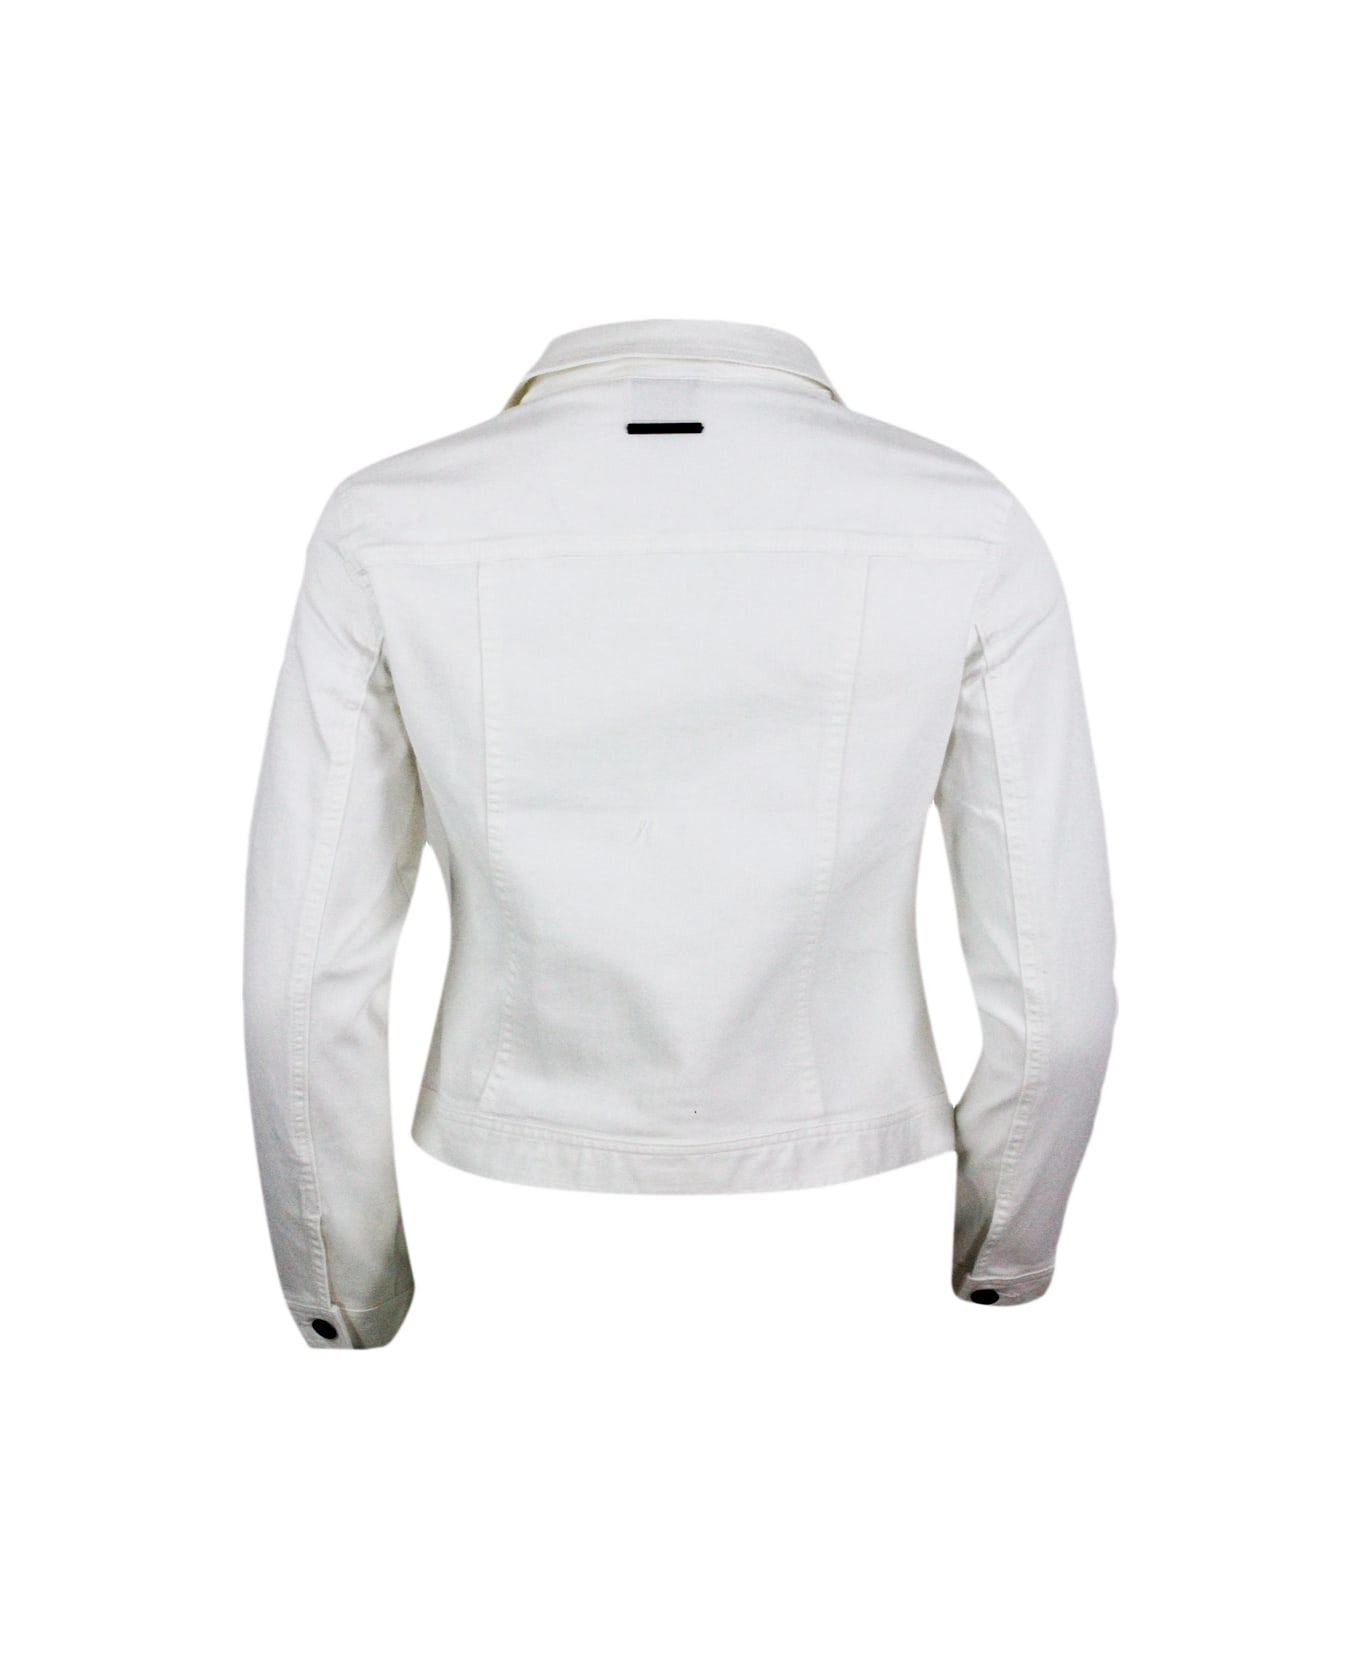 Armani Collezioni Denim Jacket With Patch Pockets On The Chest, Side Welt Pockets And Button Closure - White